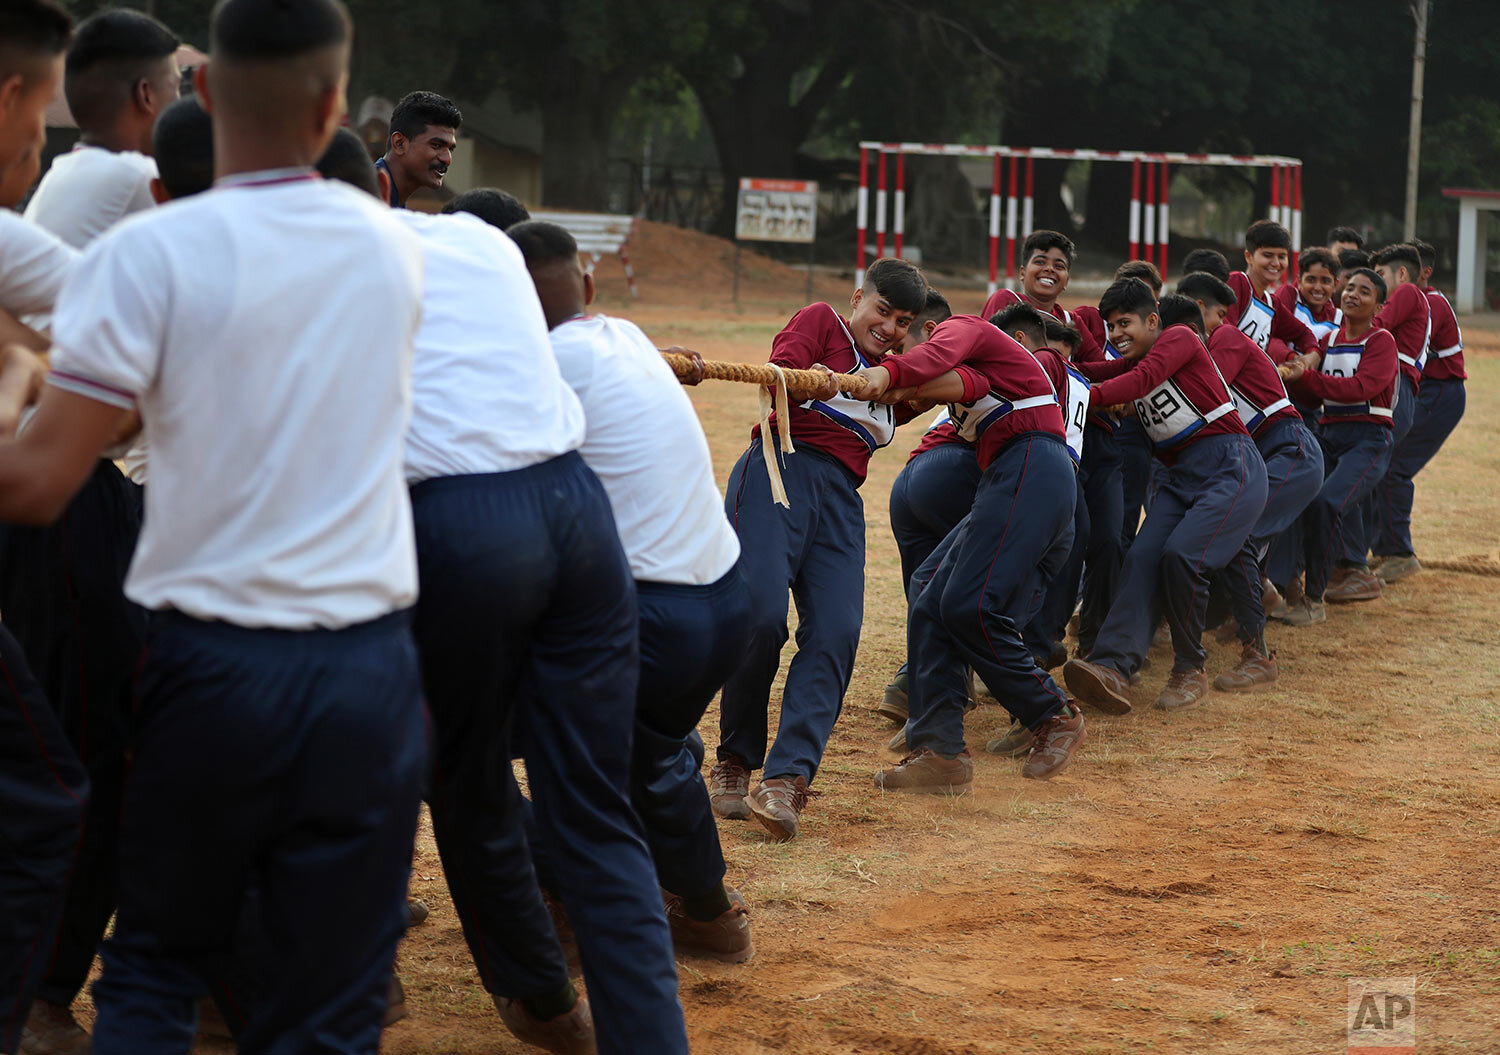  Indian army women recruits, right, pull the rope as they compete with men in tug of war as part of their training during a media visit in Bengaluru, India, Wednesday, March 31, 2021.  (AP Photo/Aijaz Rahi) 